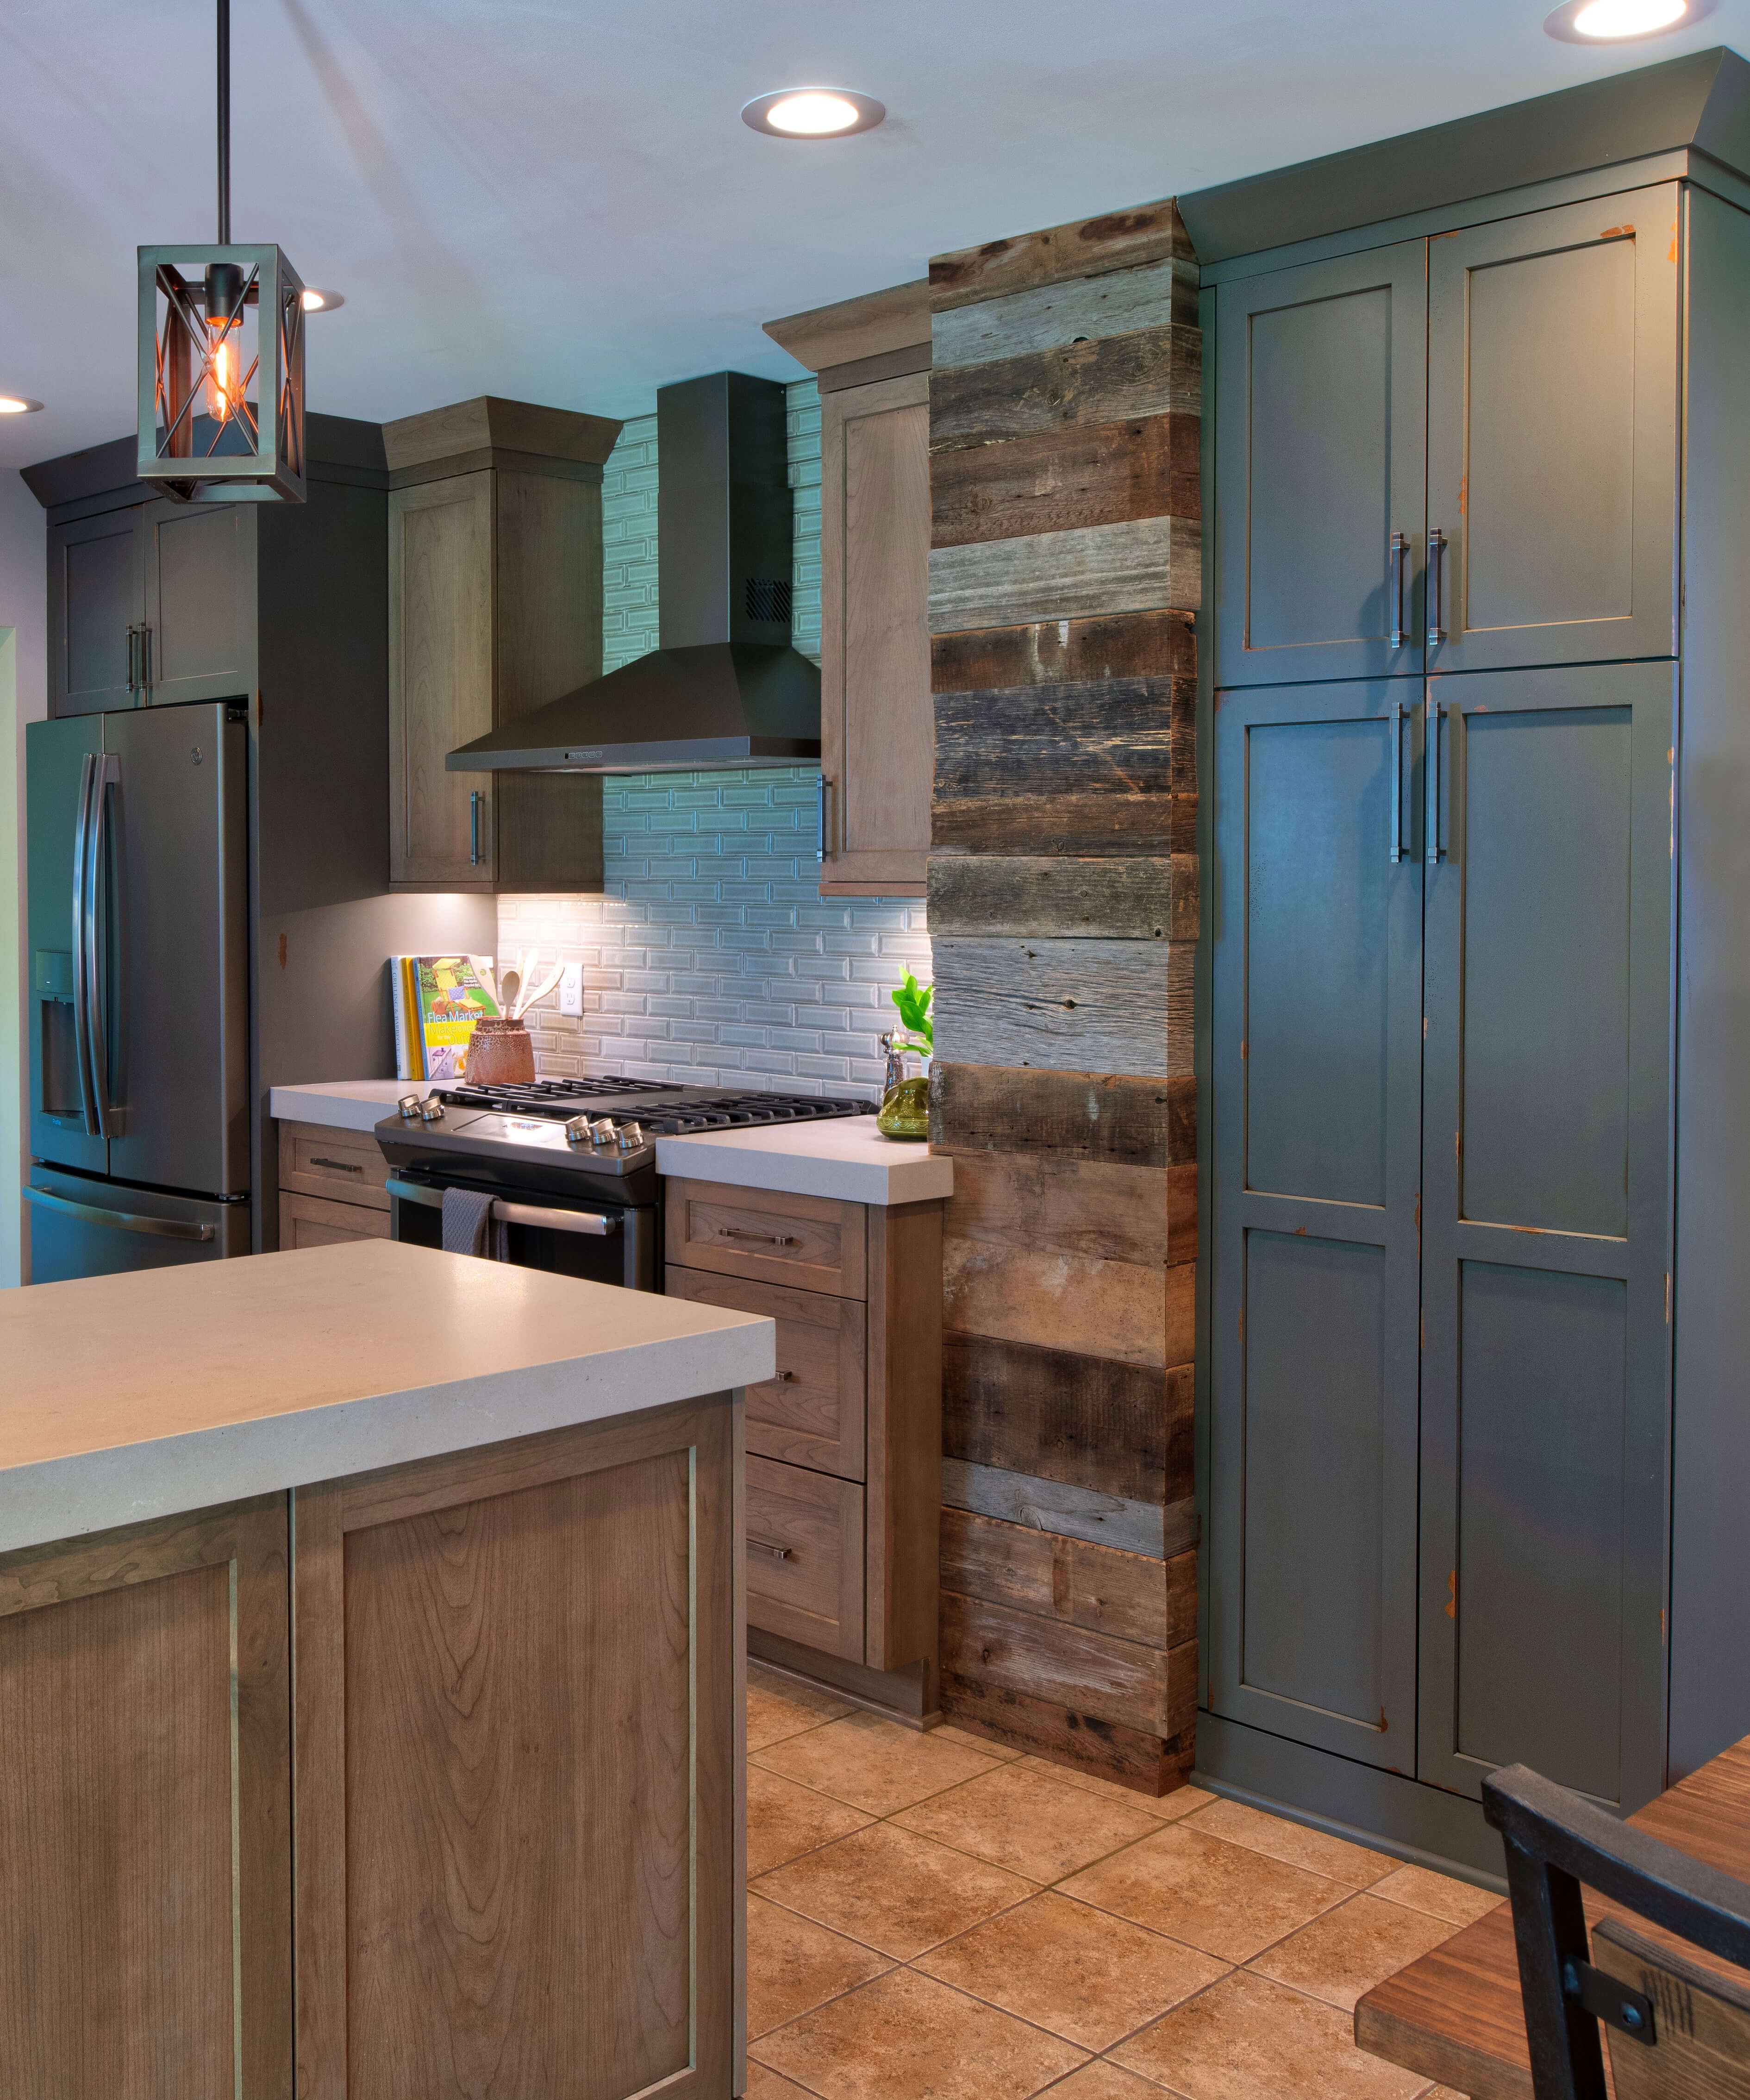 Get the Look: How to Design a Rustic Style Kitchen - Dura Supreme